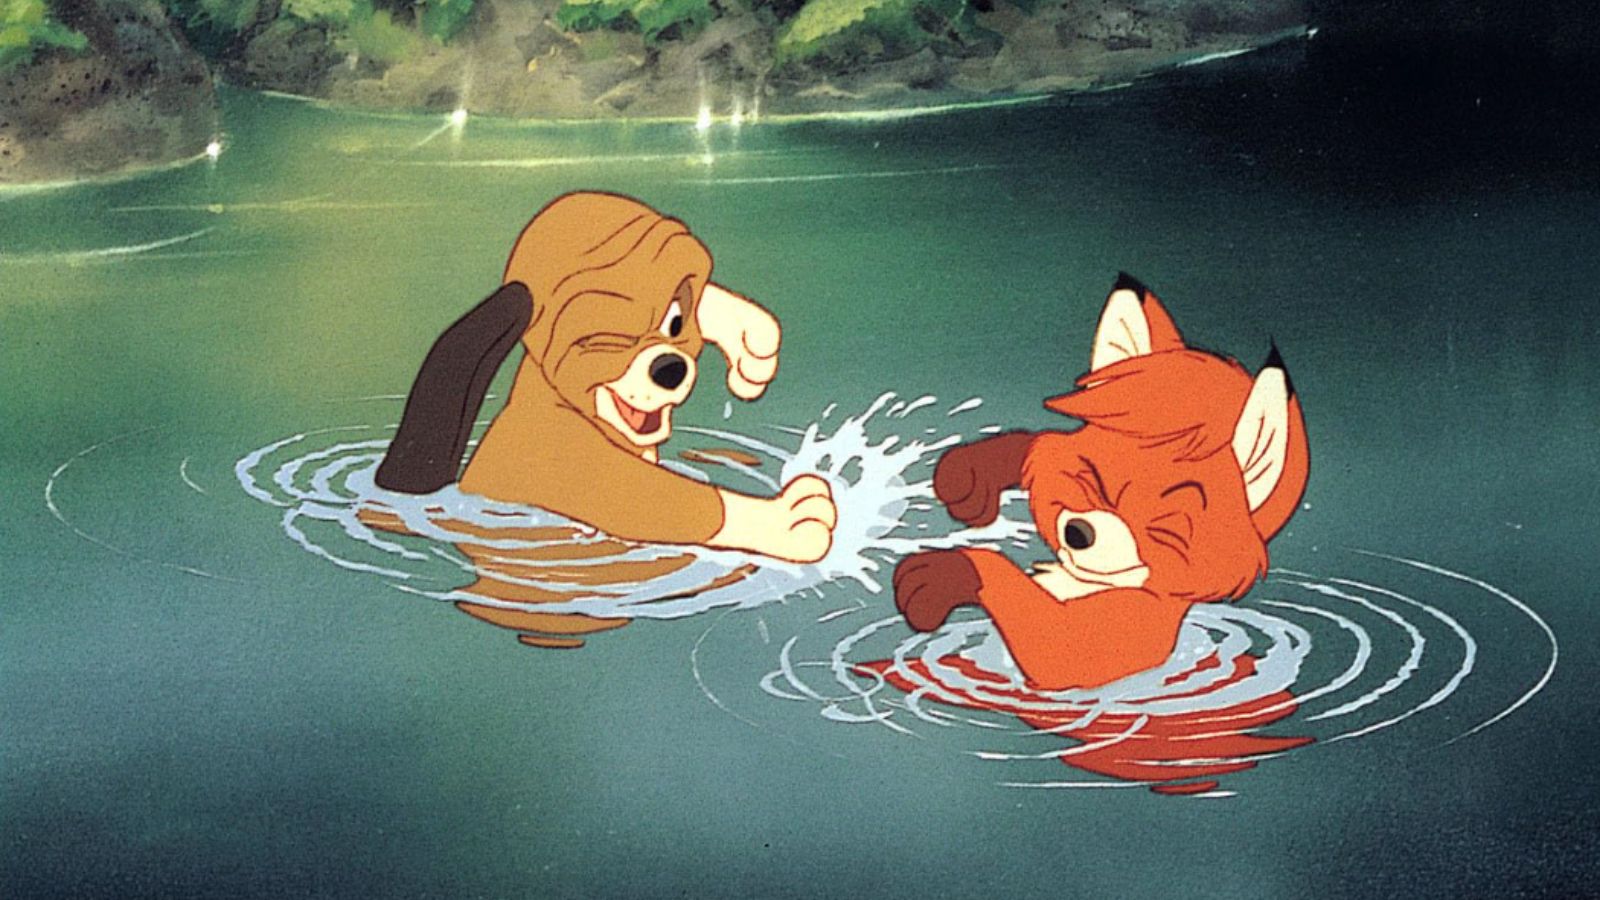 <p>This heart-wrenching tale of friendship and growing up follows the story of a young fox and a hound who form an unlikely friendship. Despite its heartwarming moments, the story takes a tragic turn when the two friends are forced to become enemies. The heartbreaking scene where Tod, the fox, is abandoned in the woods left us in tears.</p>